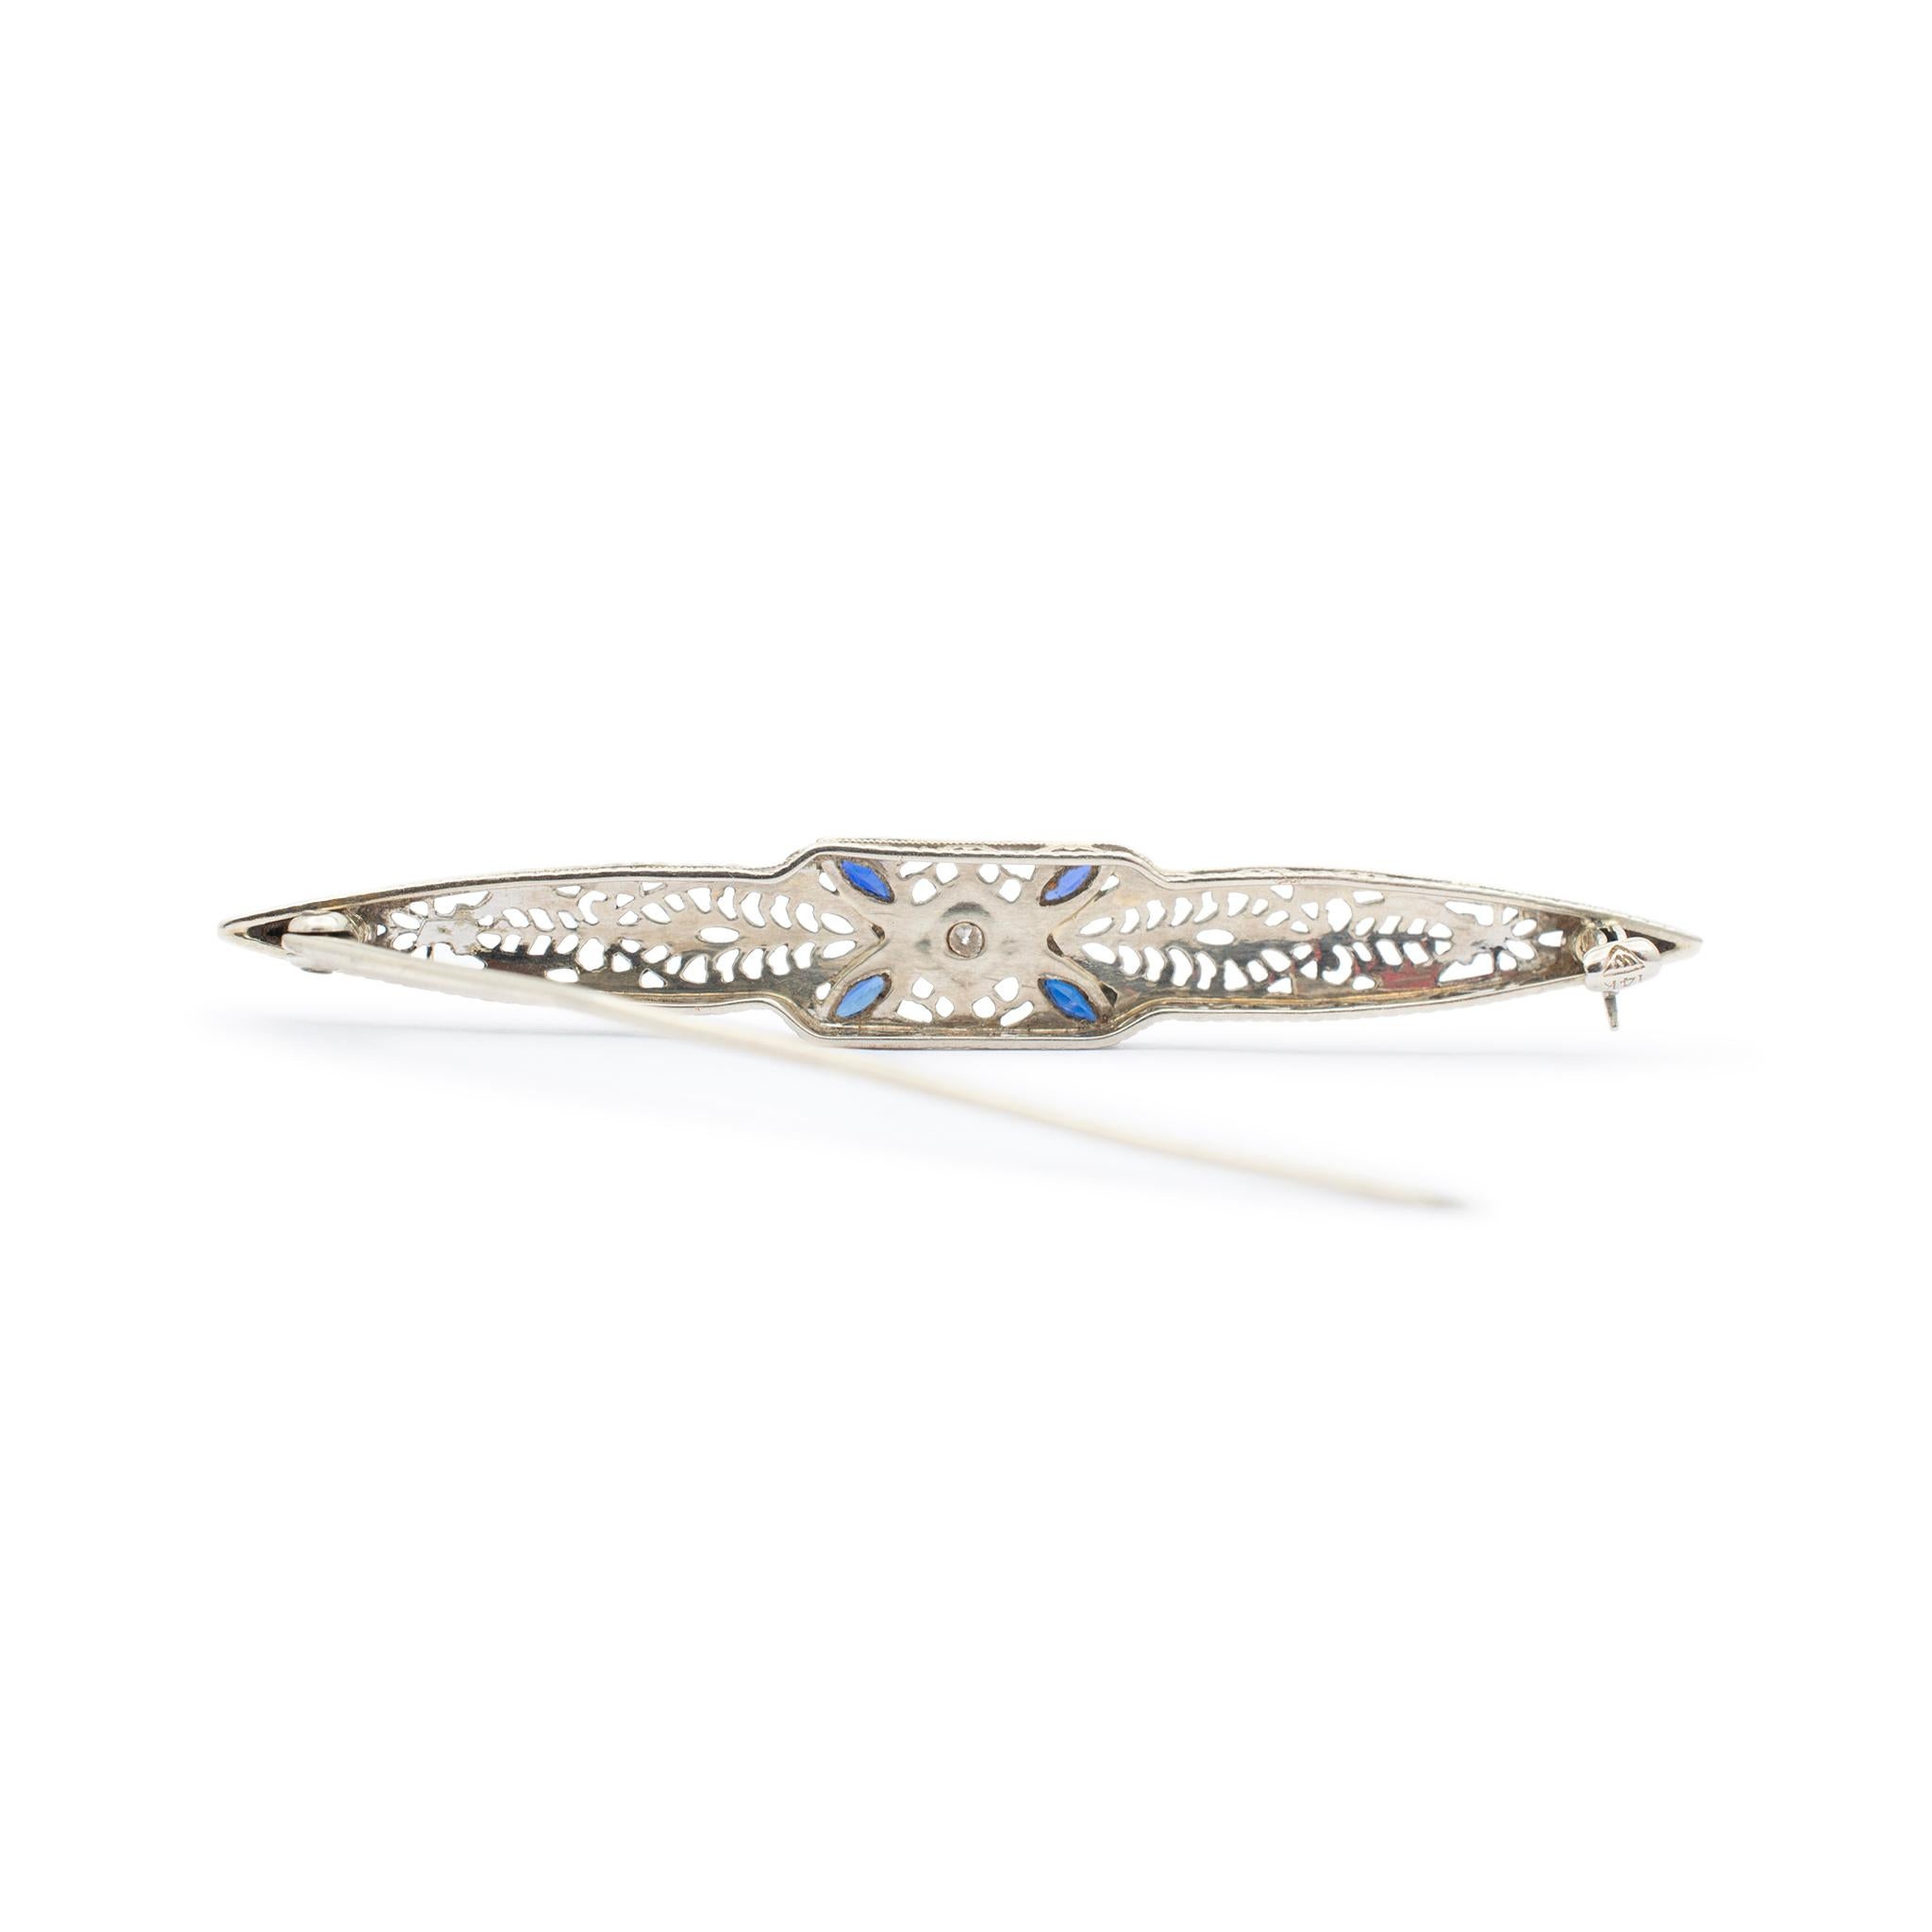 Metal Type: 14K White Gold

Length: 2.25 Inches

Width: 8.35 mm

Weight: 3.64 grams

Filigreed 14K white gold diamond and sapphire antique art-deco brooch. Engraved with 